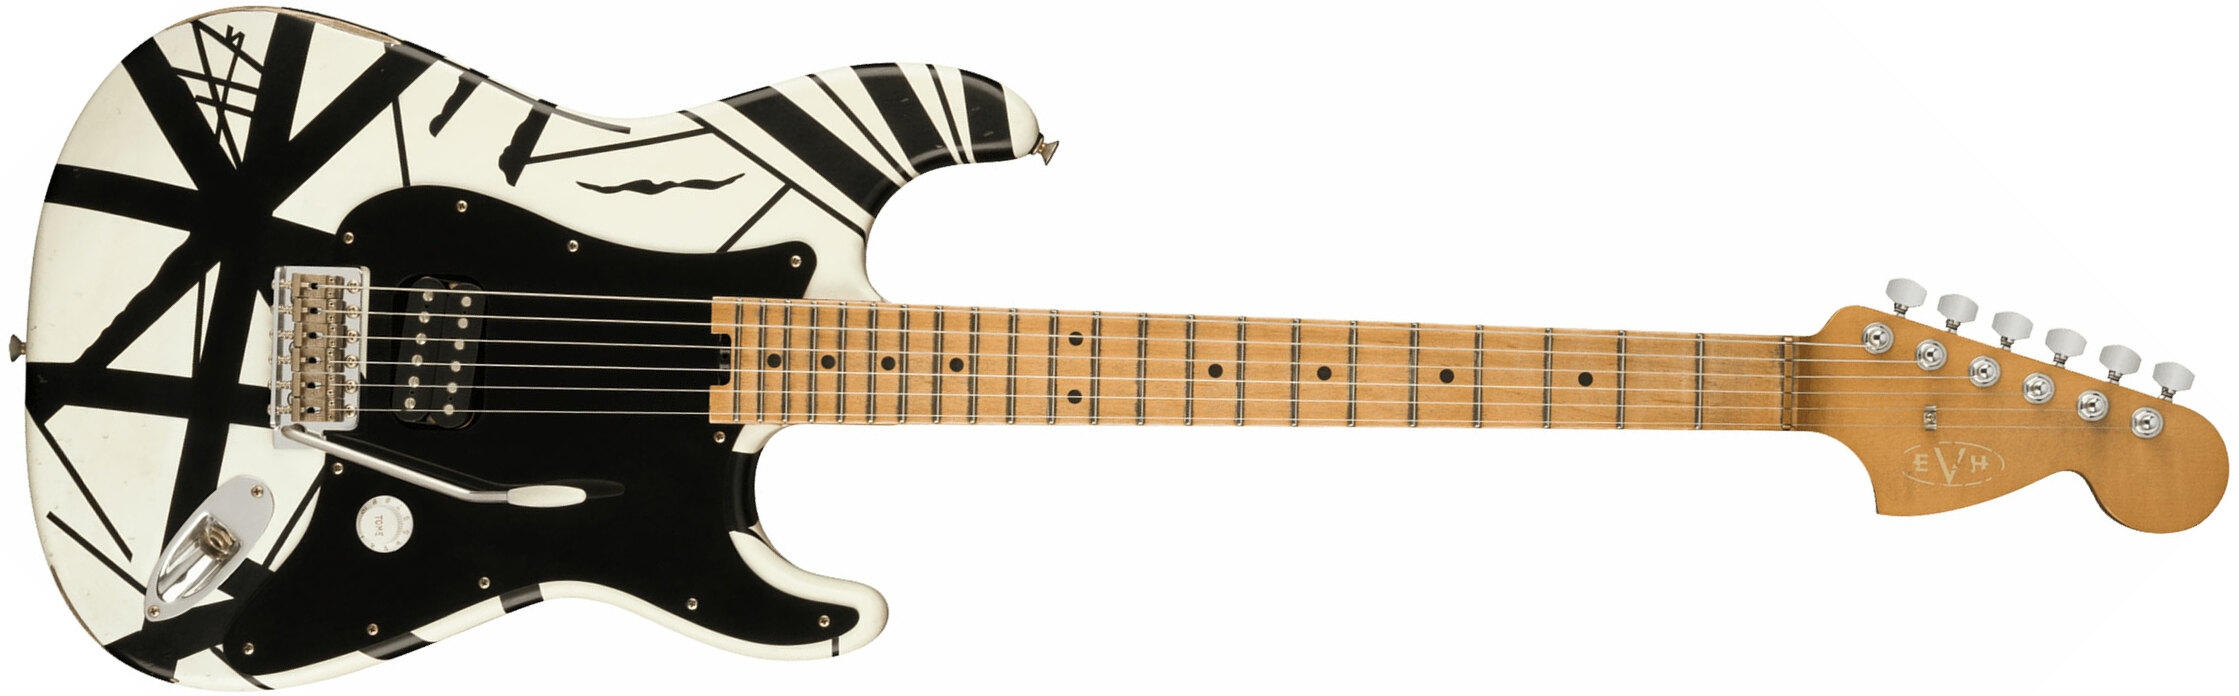 Evh '78 Eruption Striped Series Mex H Trem Mn - White With Black Stripes Relic - Str shape electric guitar - Main picture